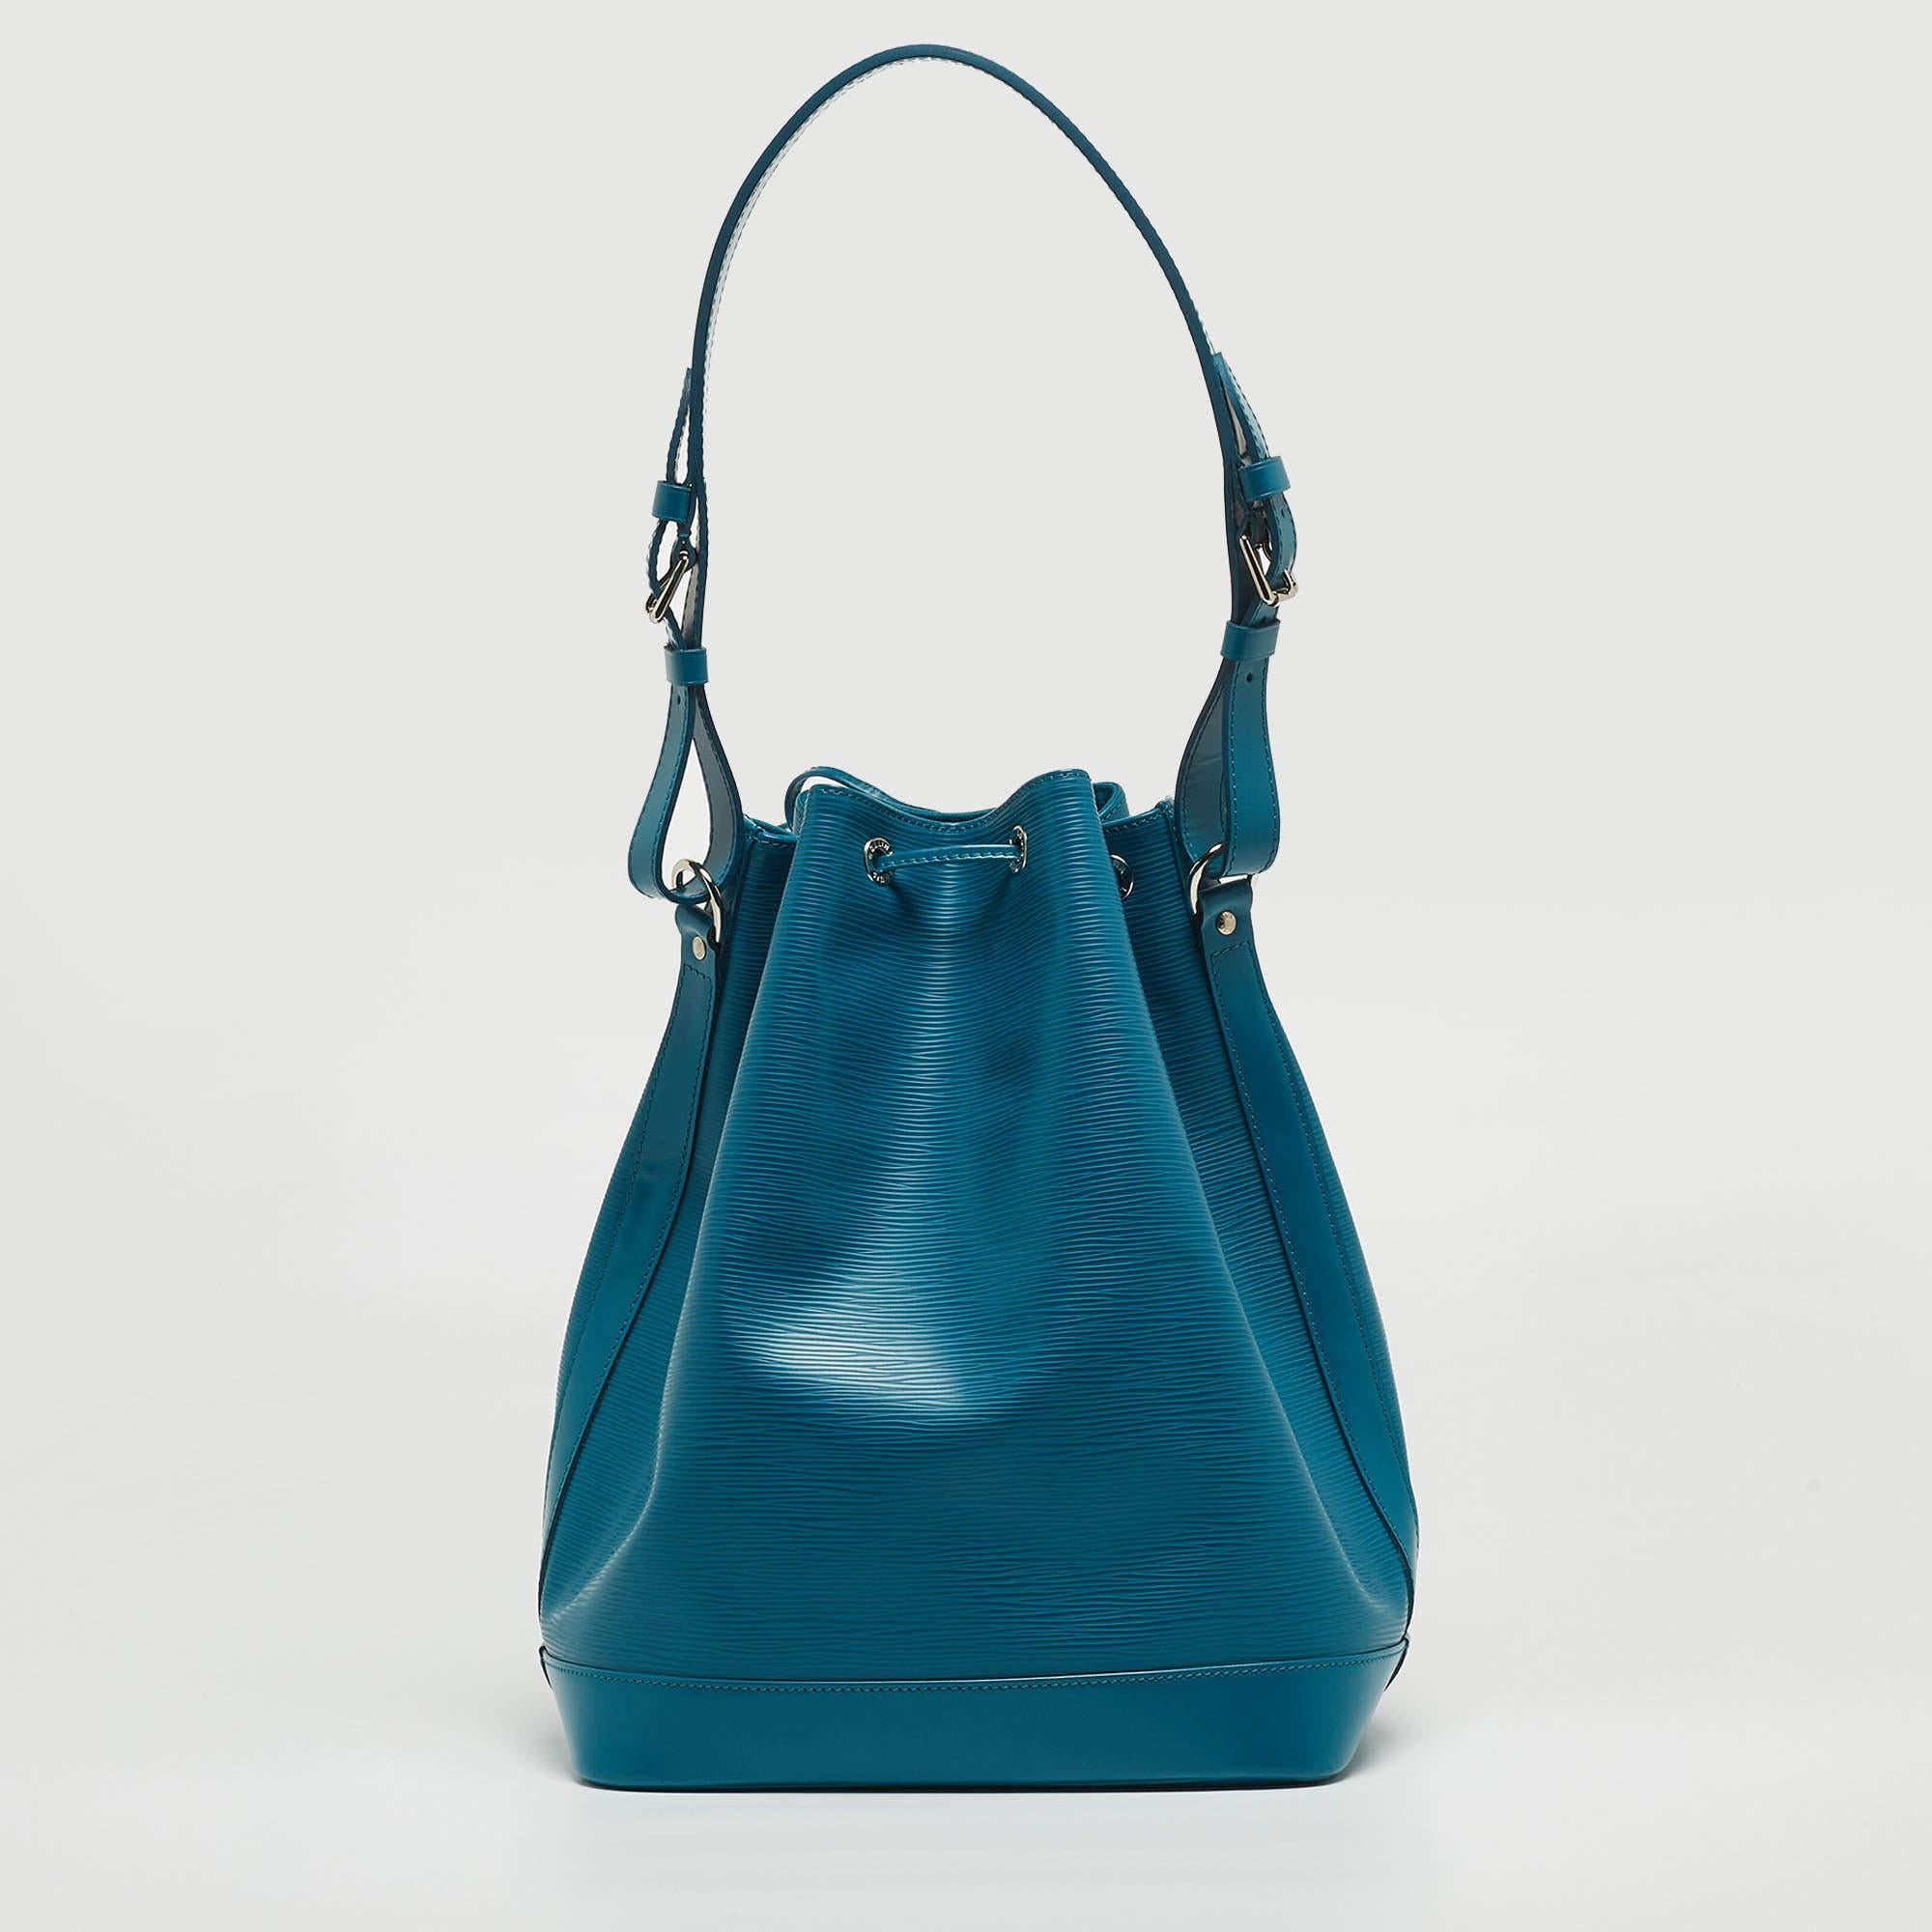 The Louis Vuitton Noe Bag is an exquisite accessory. Crafted from textured cyan epi leather, it features a drawstring closure, silver-tone hardware, and an adjustable shoulder strap. The iconic LV craftsmanship adds a touch of luxury to this